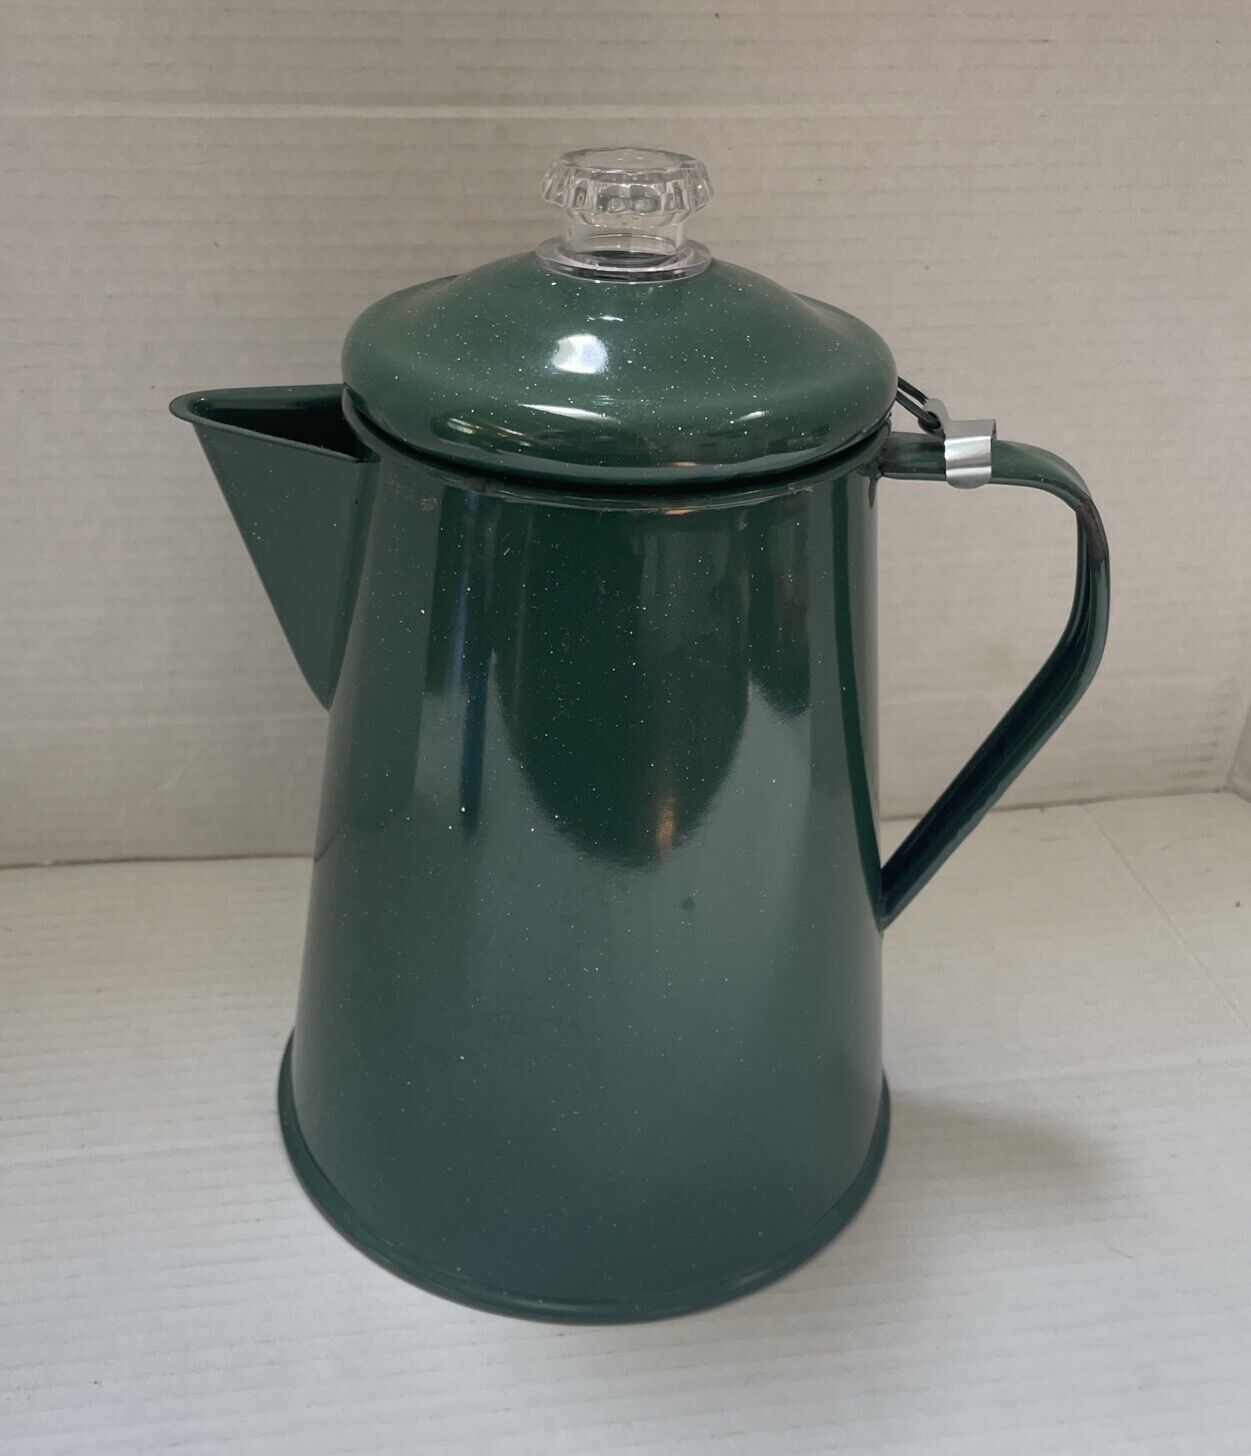 Outdoor Camping Home Enamelware Percolator Coffee Pot 10 Cup Green Speckled